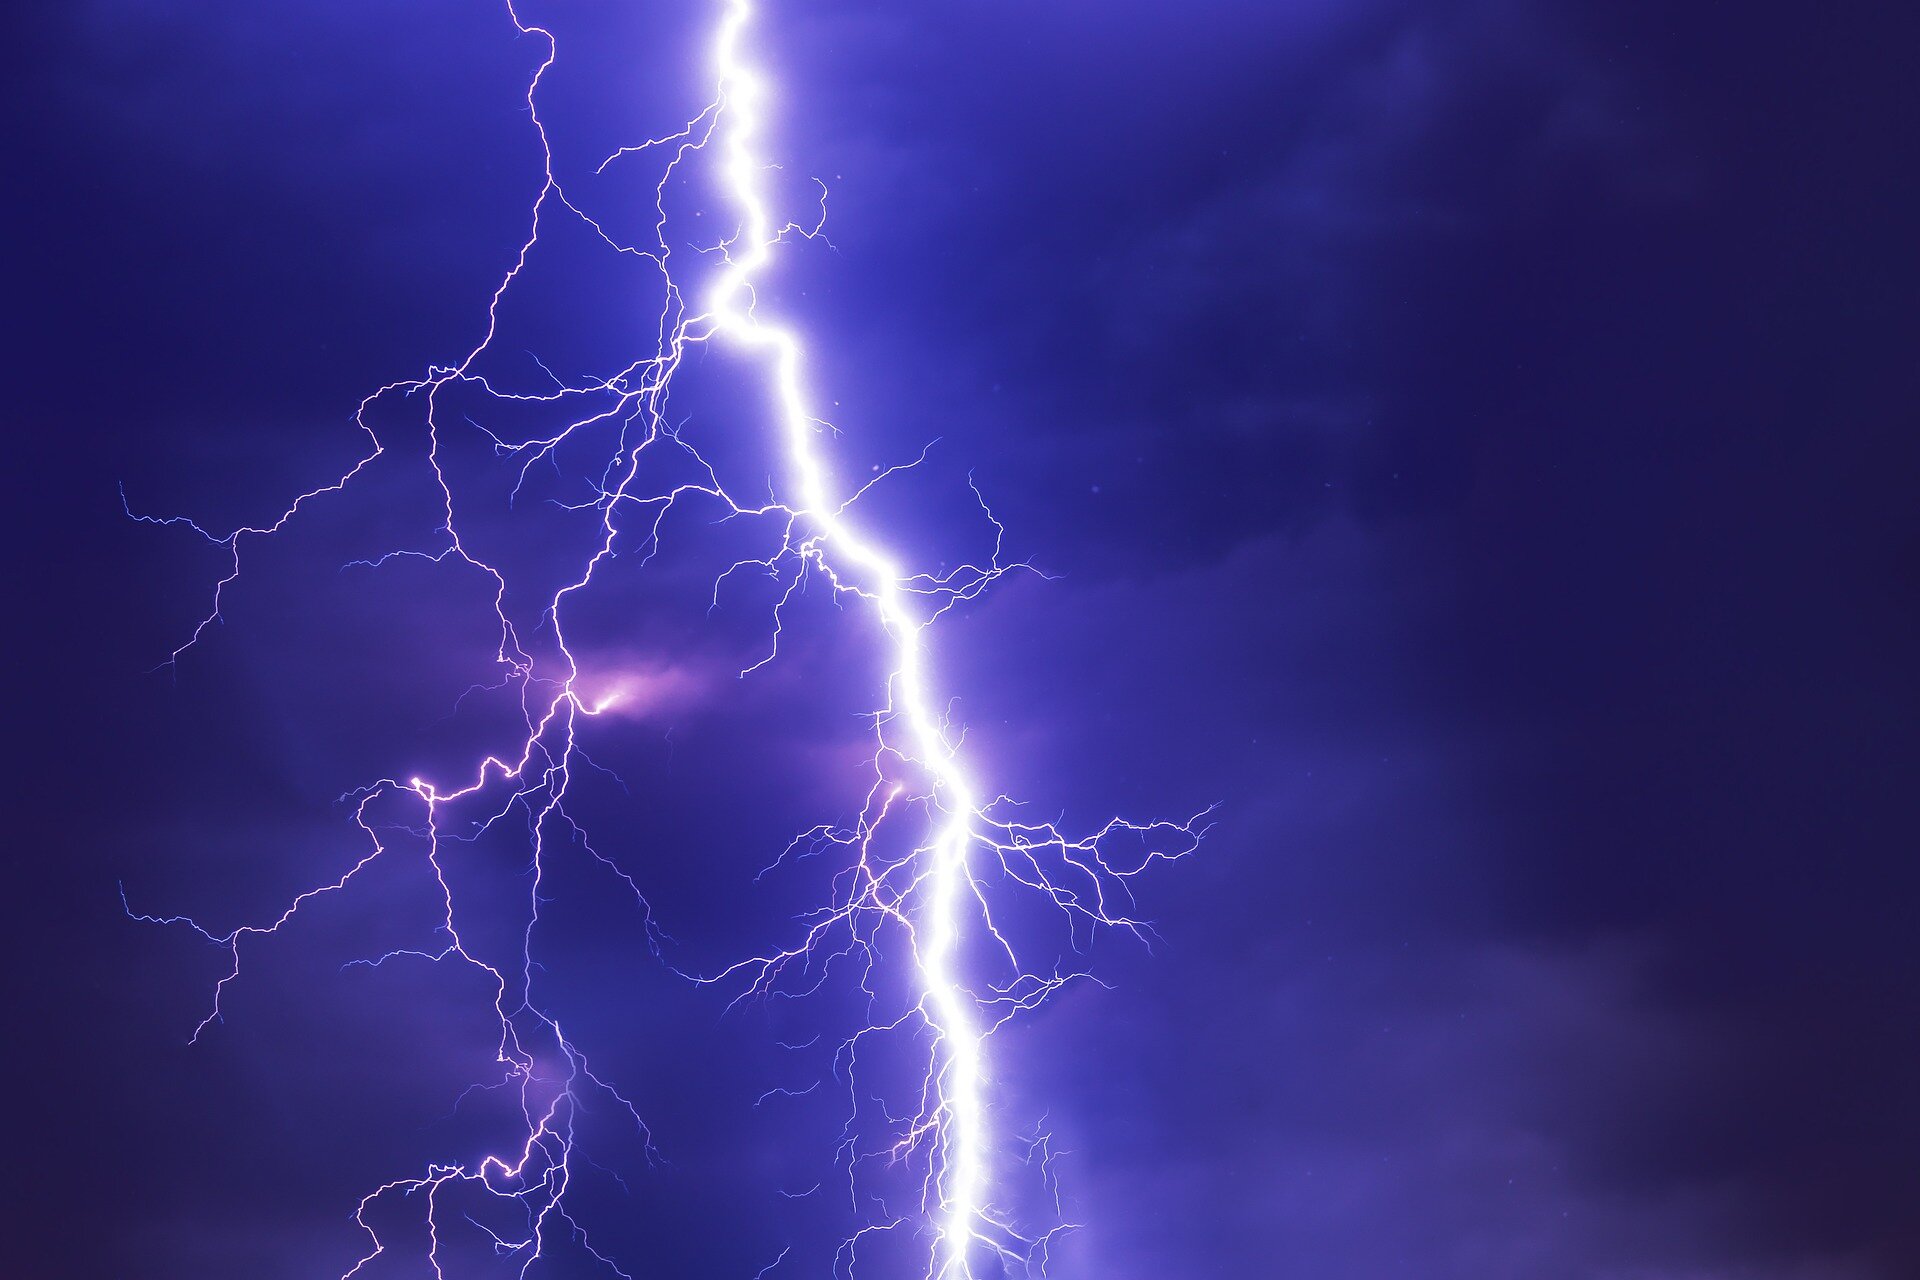 Physicists strike gold, solving 50-year lightning mystery